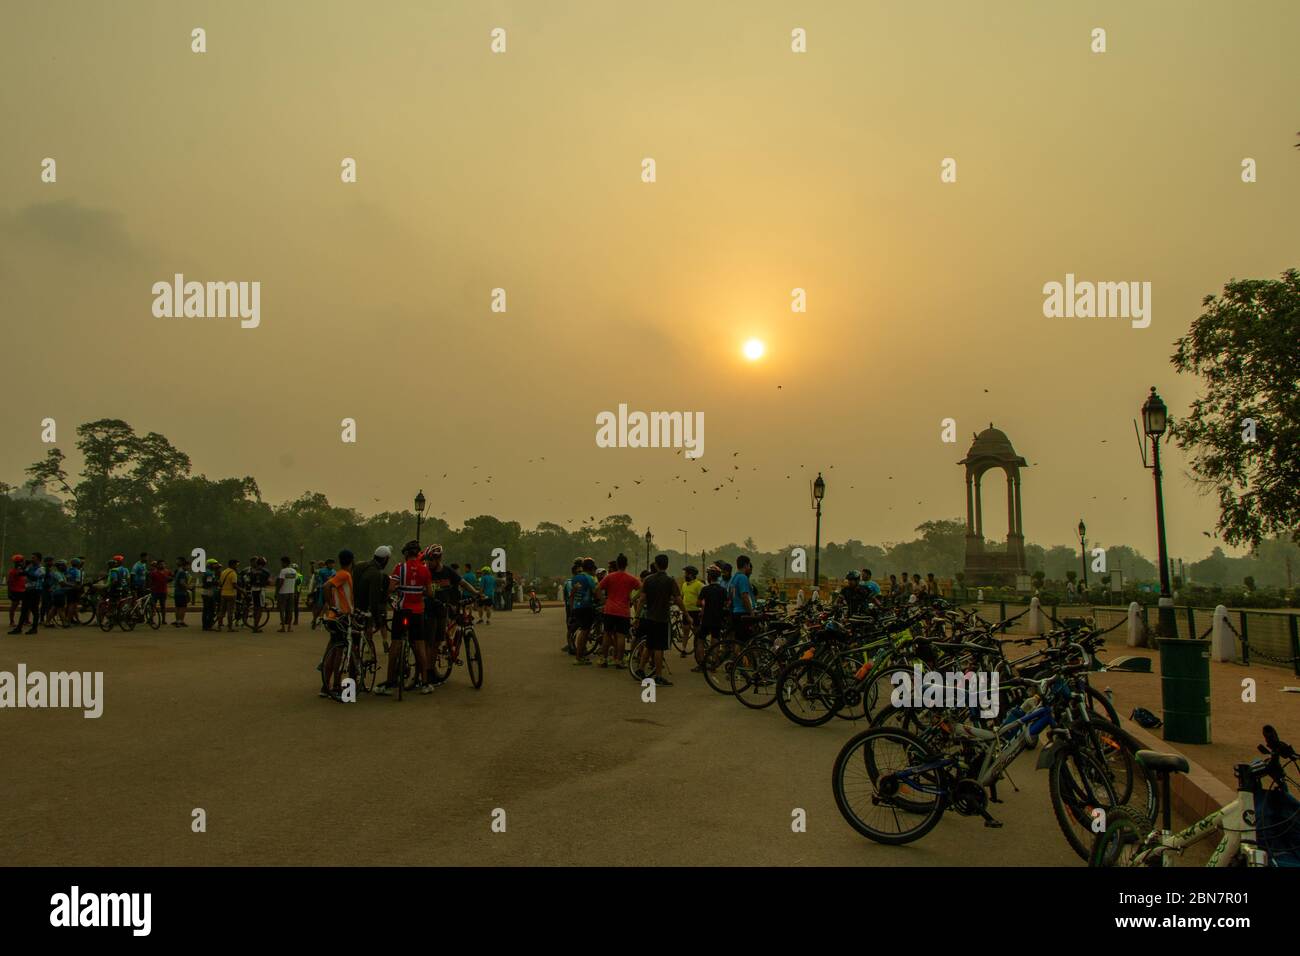 Cyclists gather in front of India gate at Rajpath road near Amar Jawan Jyoti at sunrise. Stock Photo